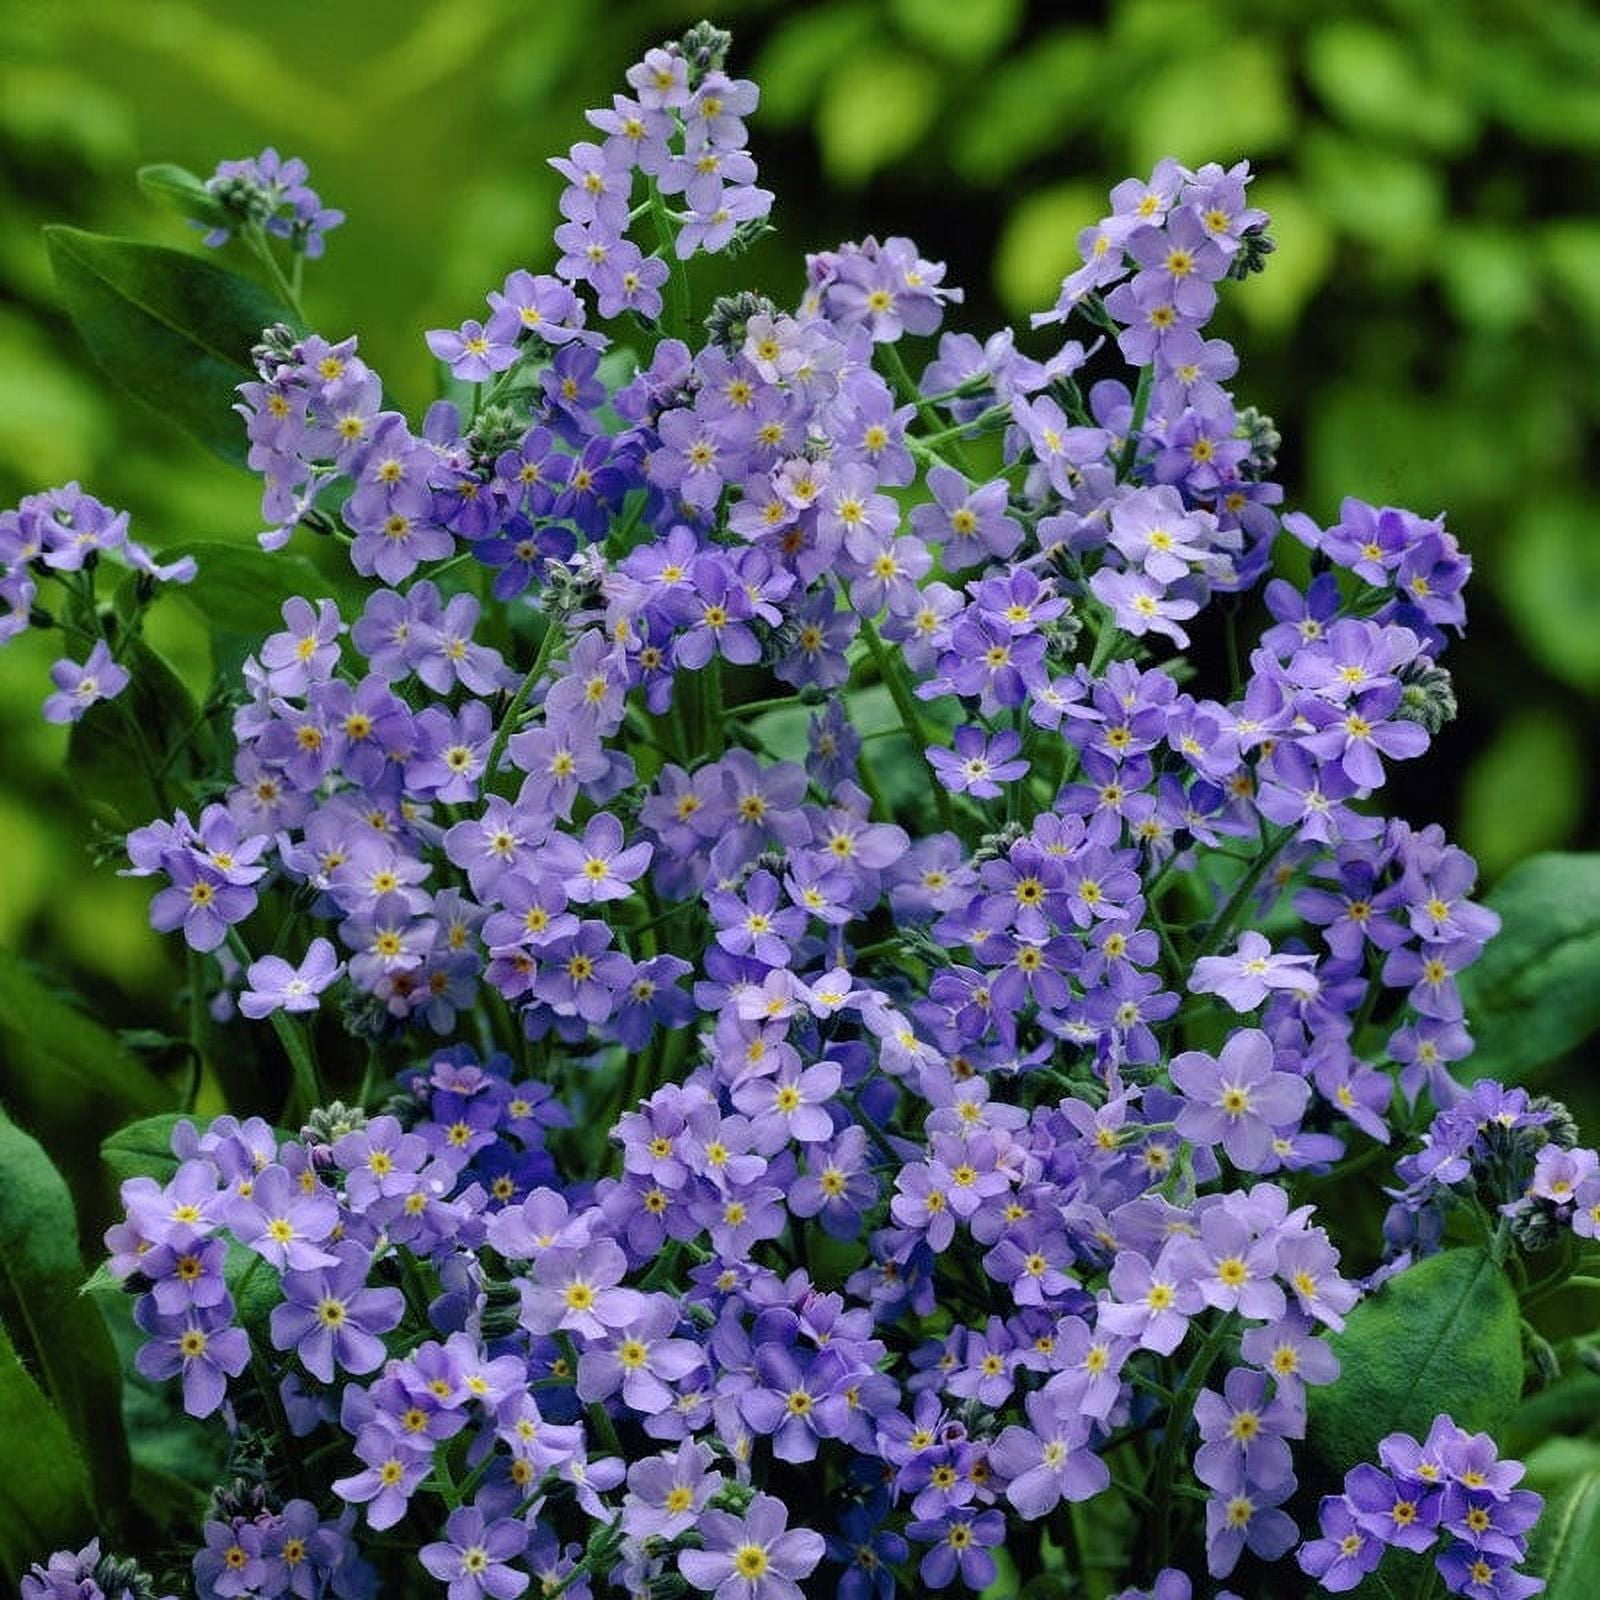 Forget Me Not Seeds - Blue - 1 Ounce - Blue Flower Seeds, Heirloom Seed  Attracts Bees, Attracts Butterflies, Attracts Hummingbirds, Attracts